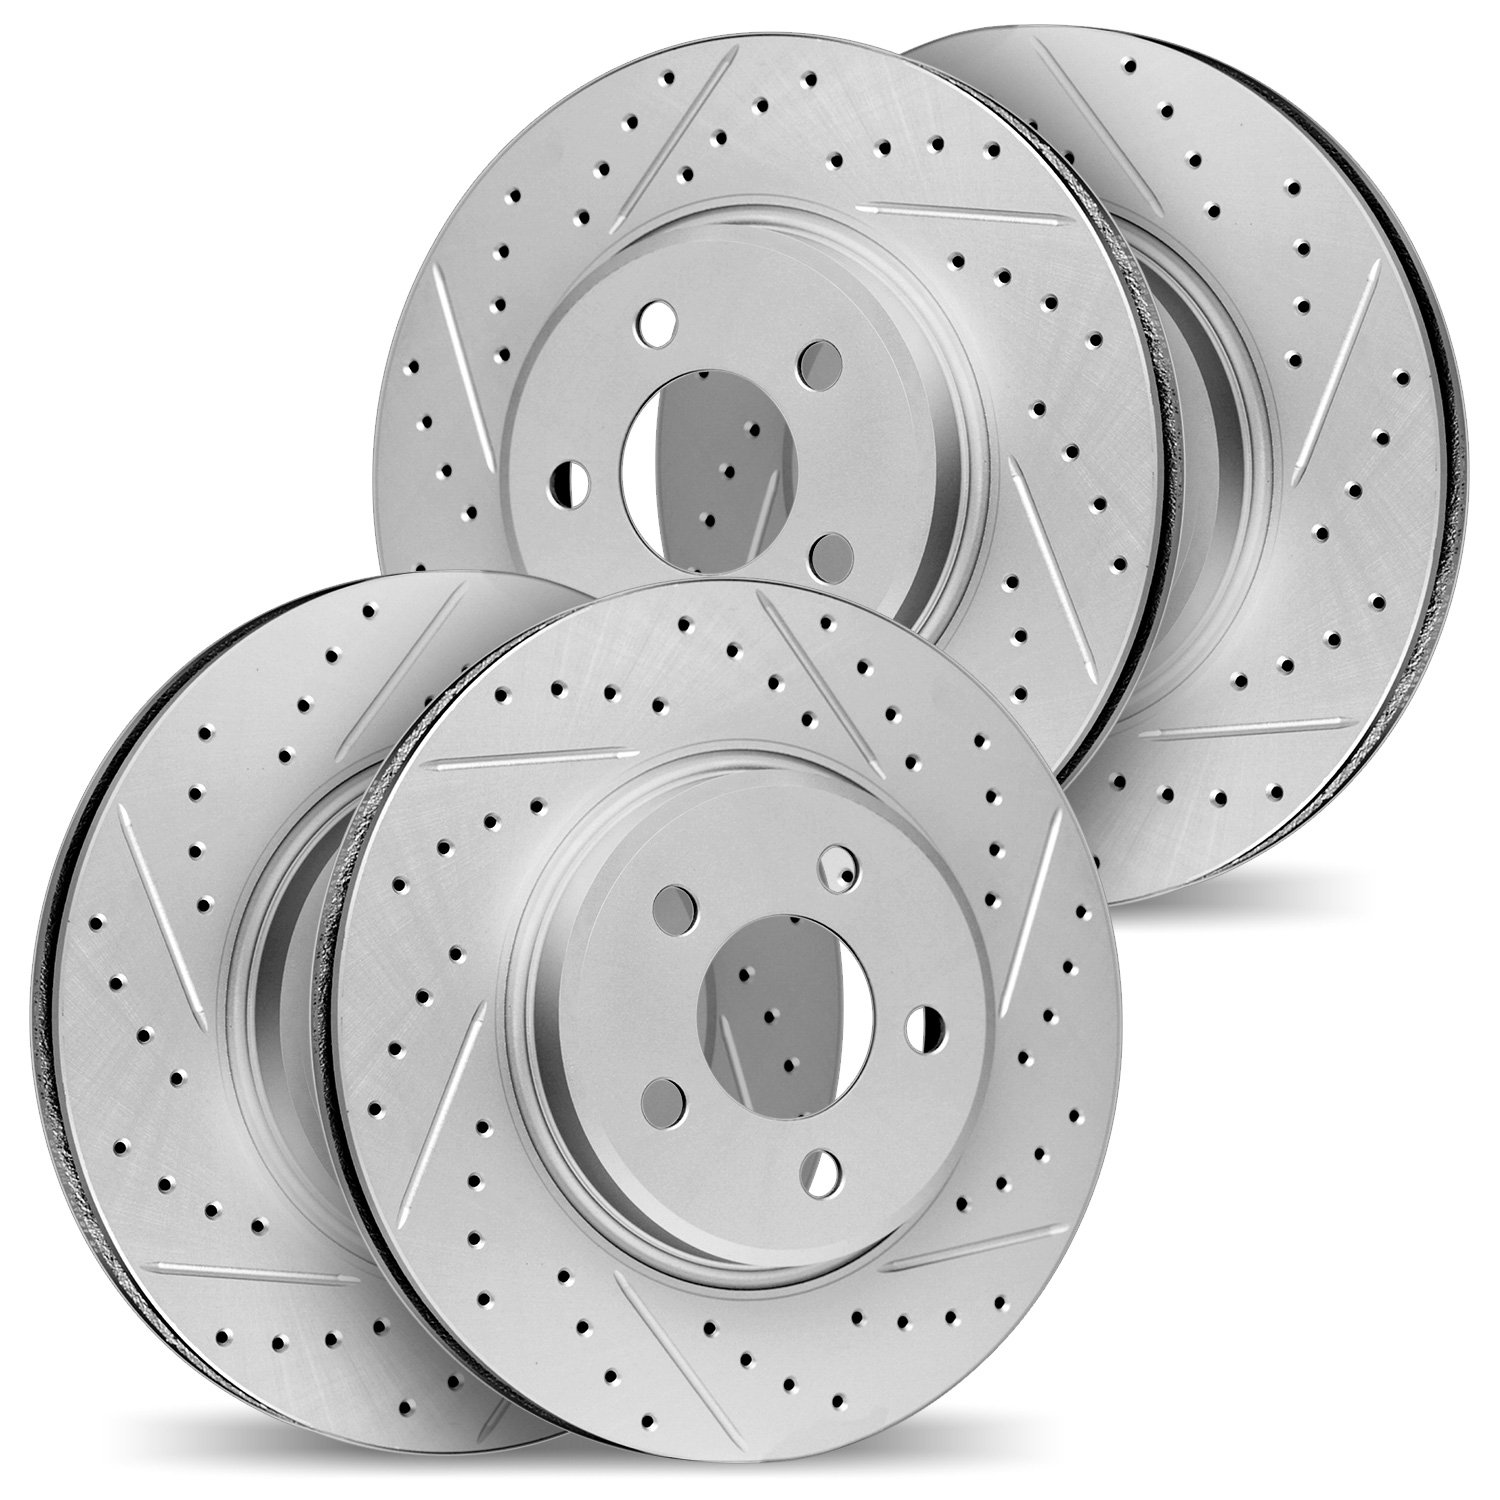 2004-31049 Geoperformance Drilled/Slotted Brake Rotors, 2015-2015 BMW, Position: Front and Rear